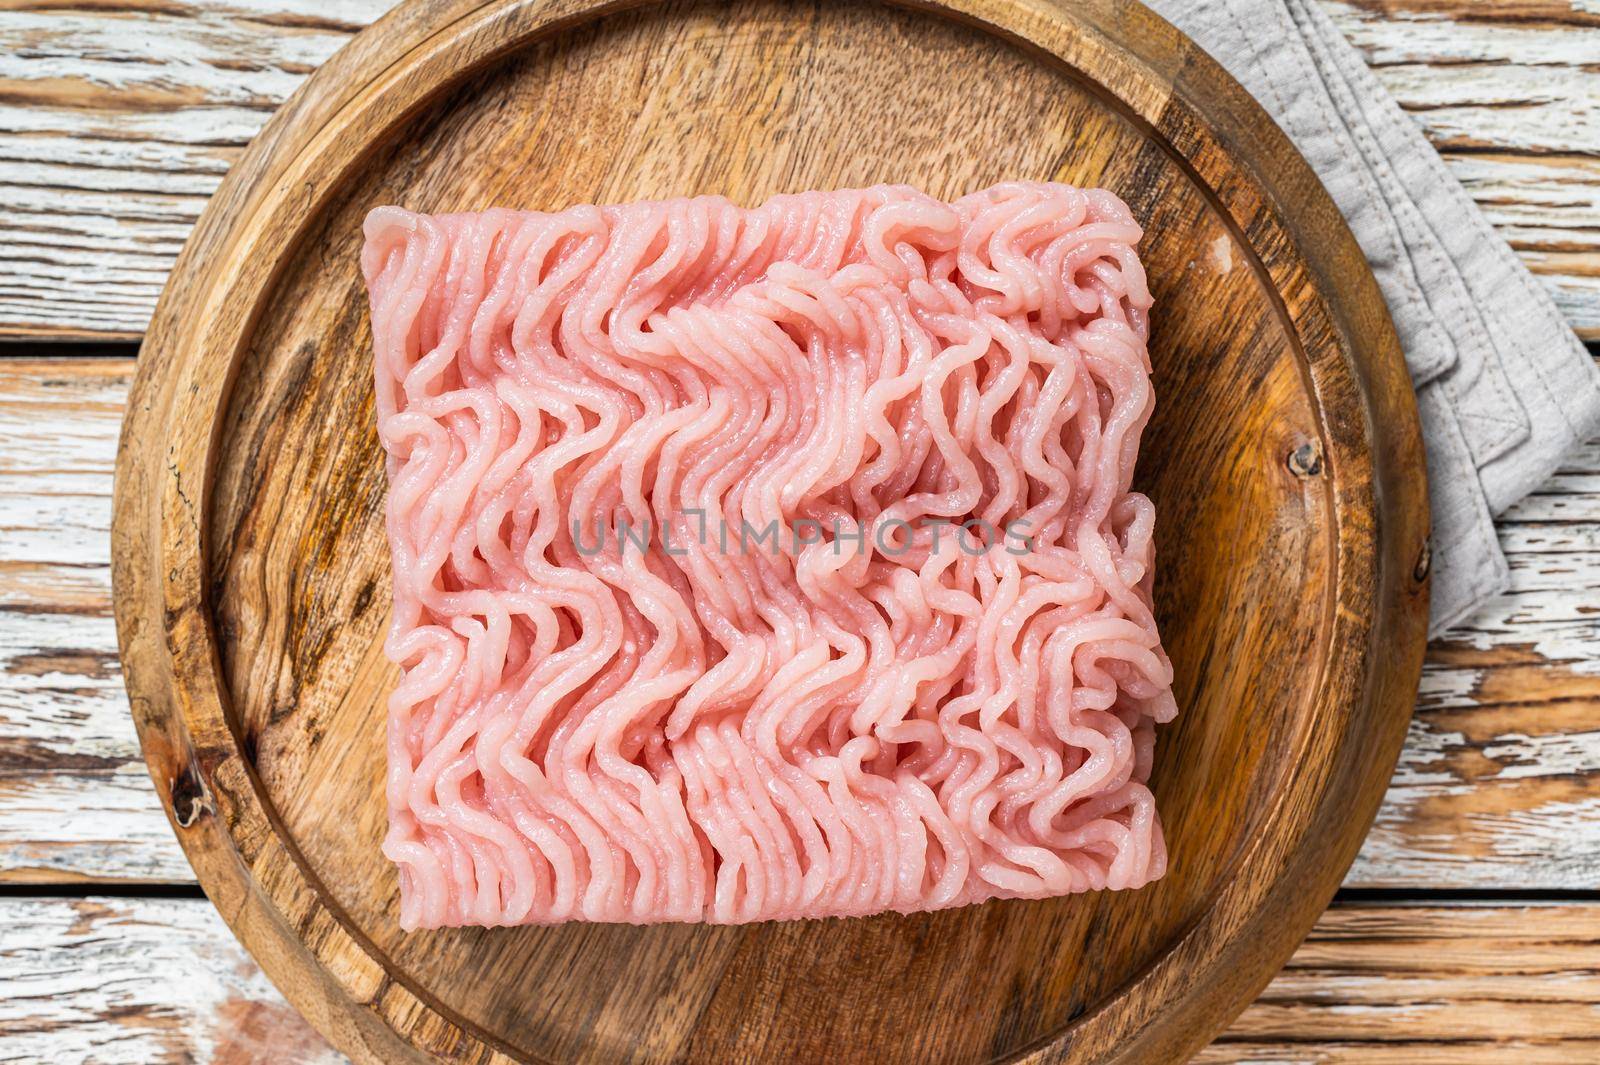 Raw mince or ground chicken meat on wooden board. White background. Top view.